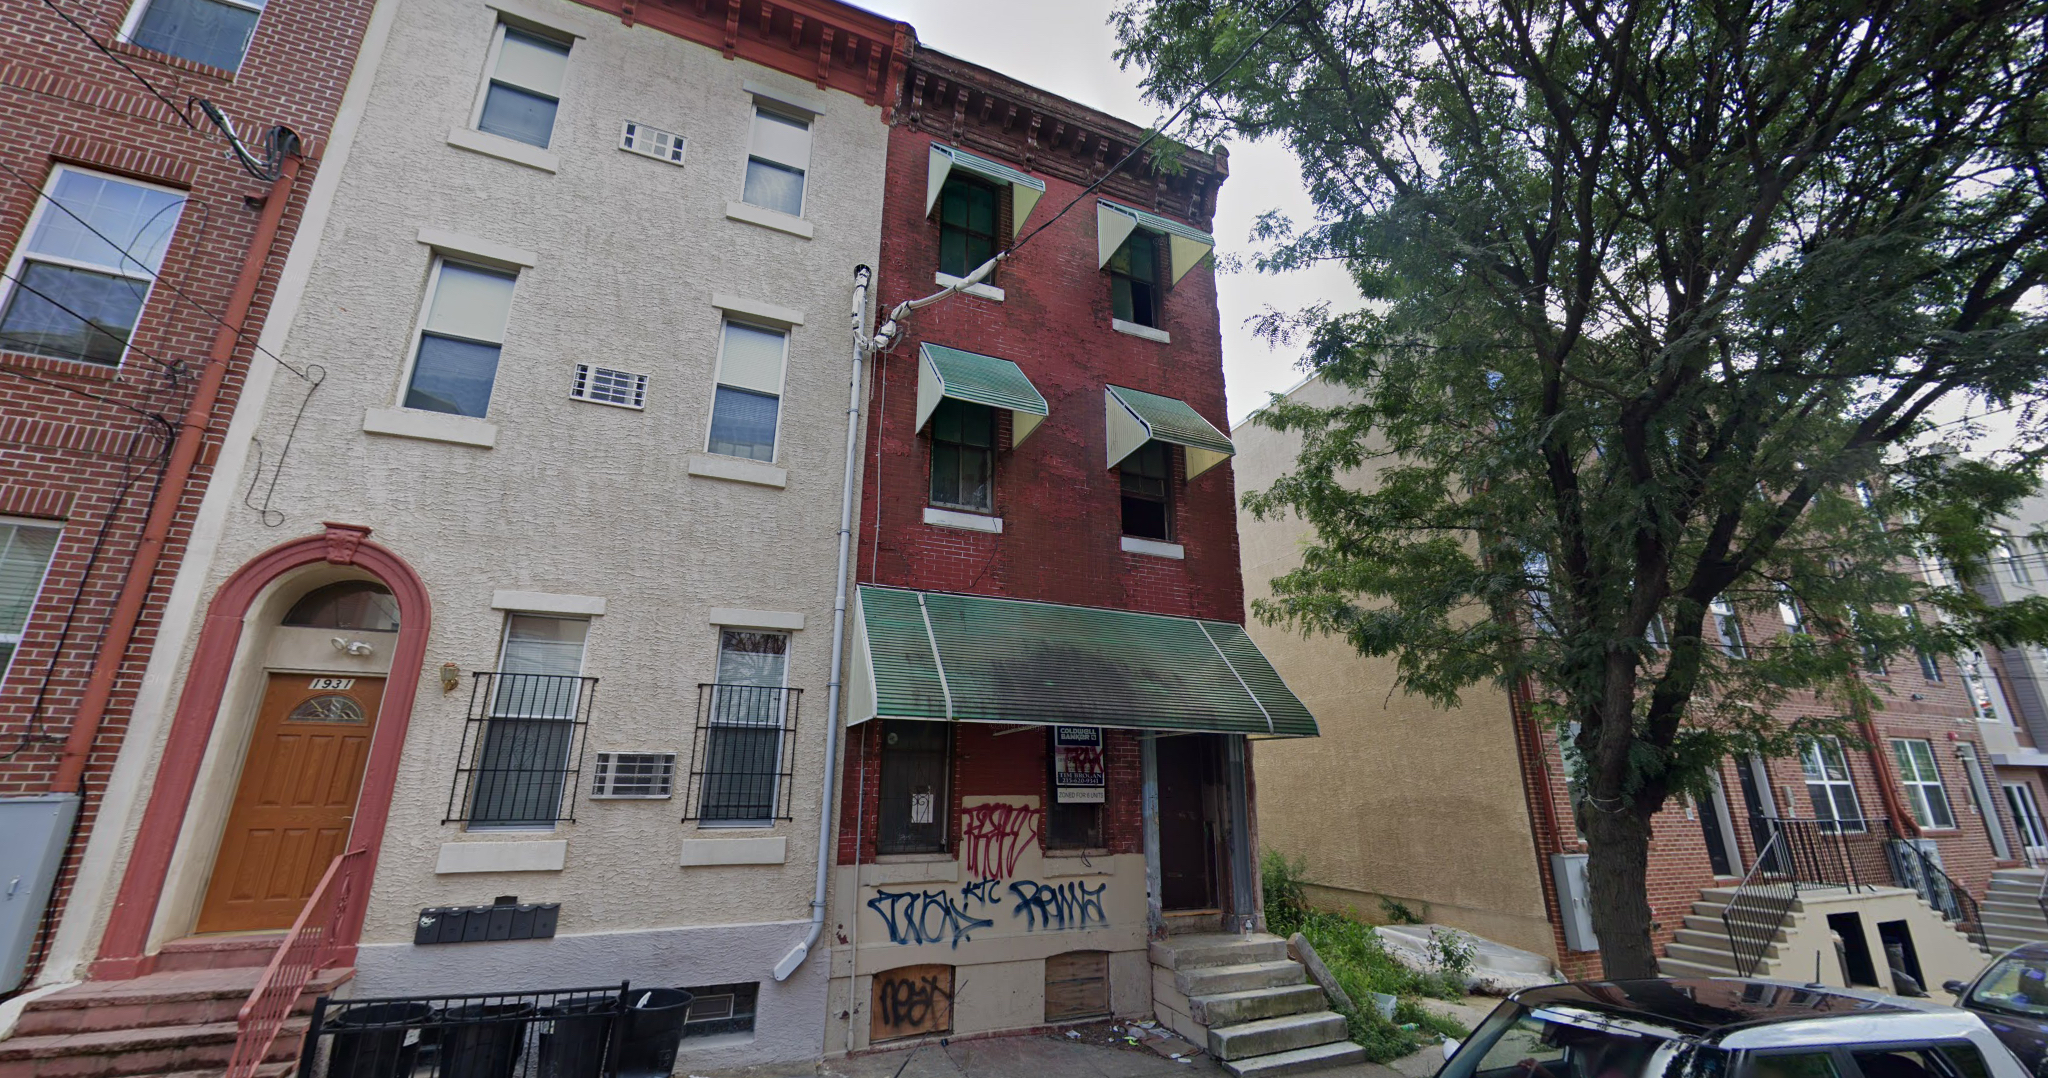 Current view of 1929 North 7th Street. Credit: Google.